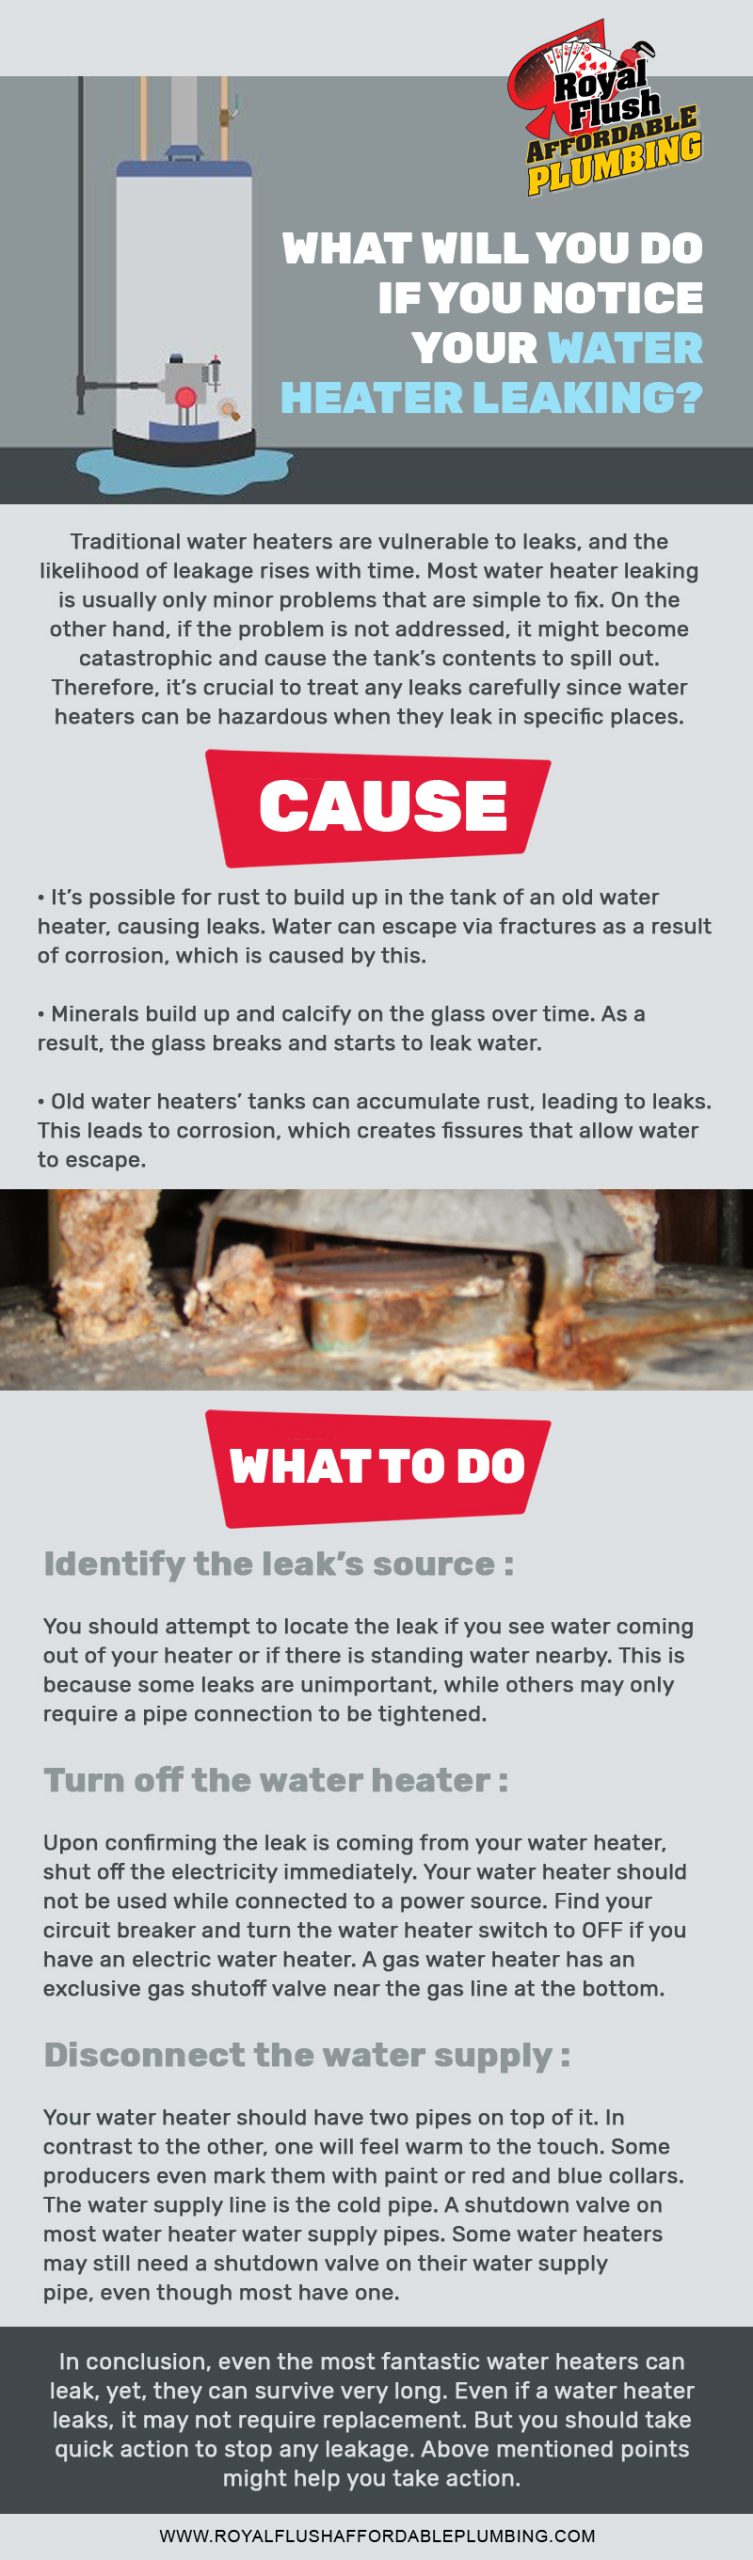 water-heater-leaking-infographics